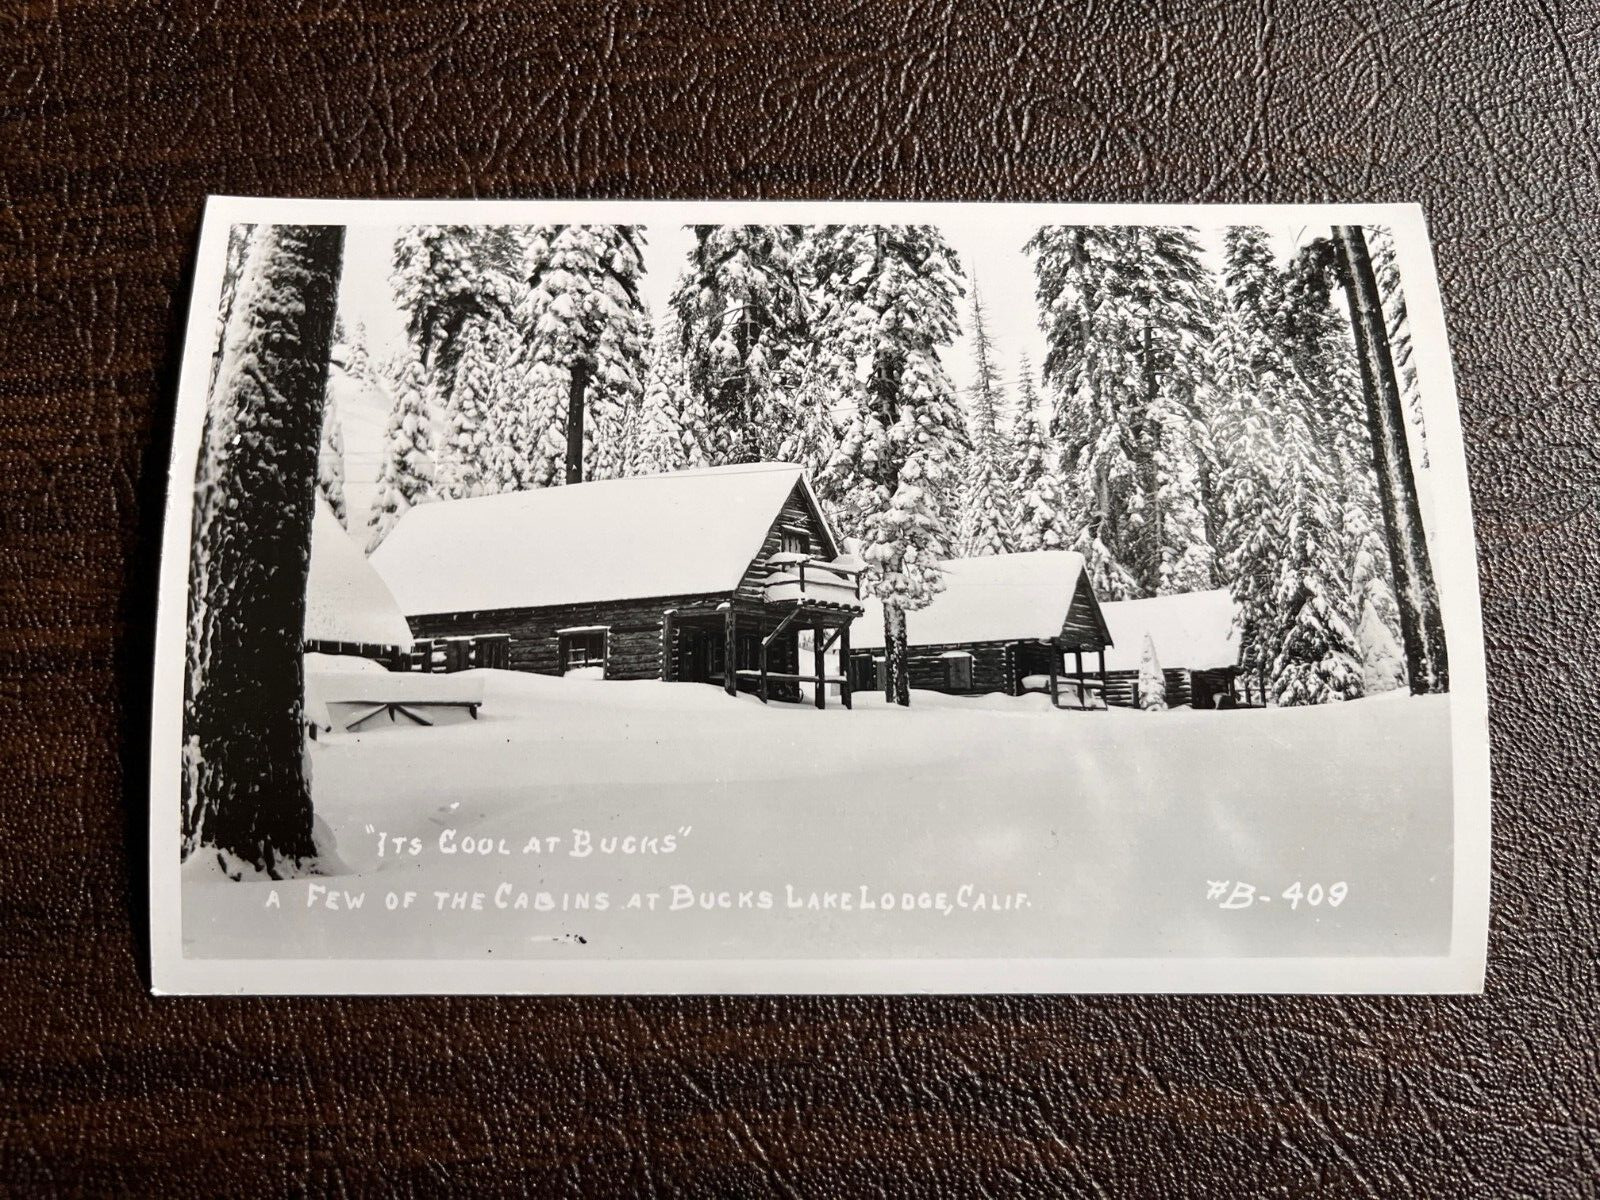 RPPC Buck's Lake California - View of Cabins Covered in Snow - 1940s era